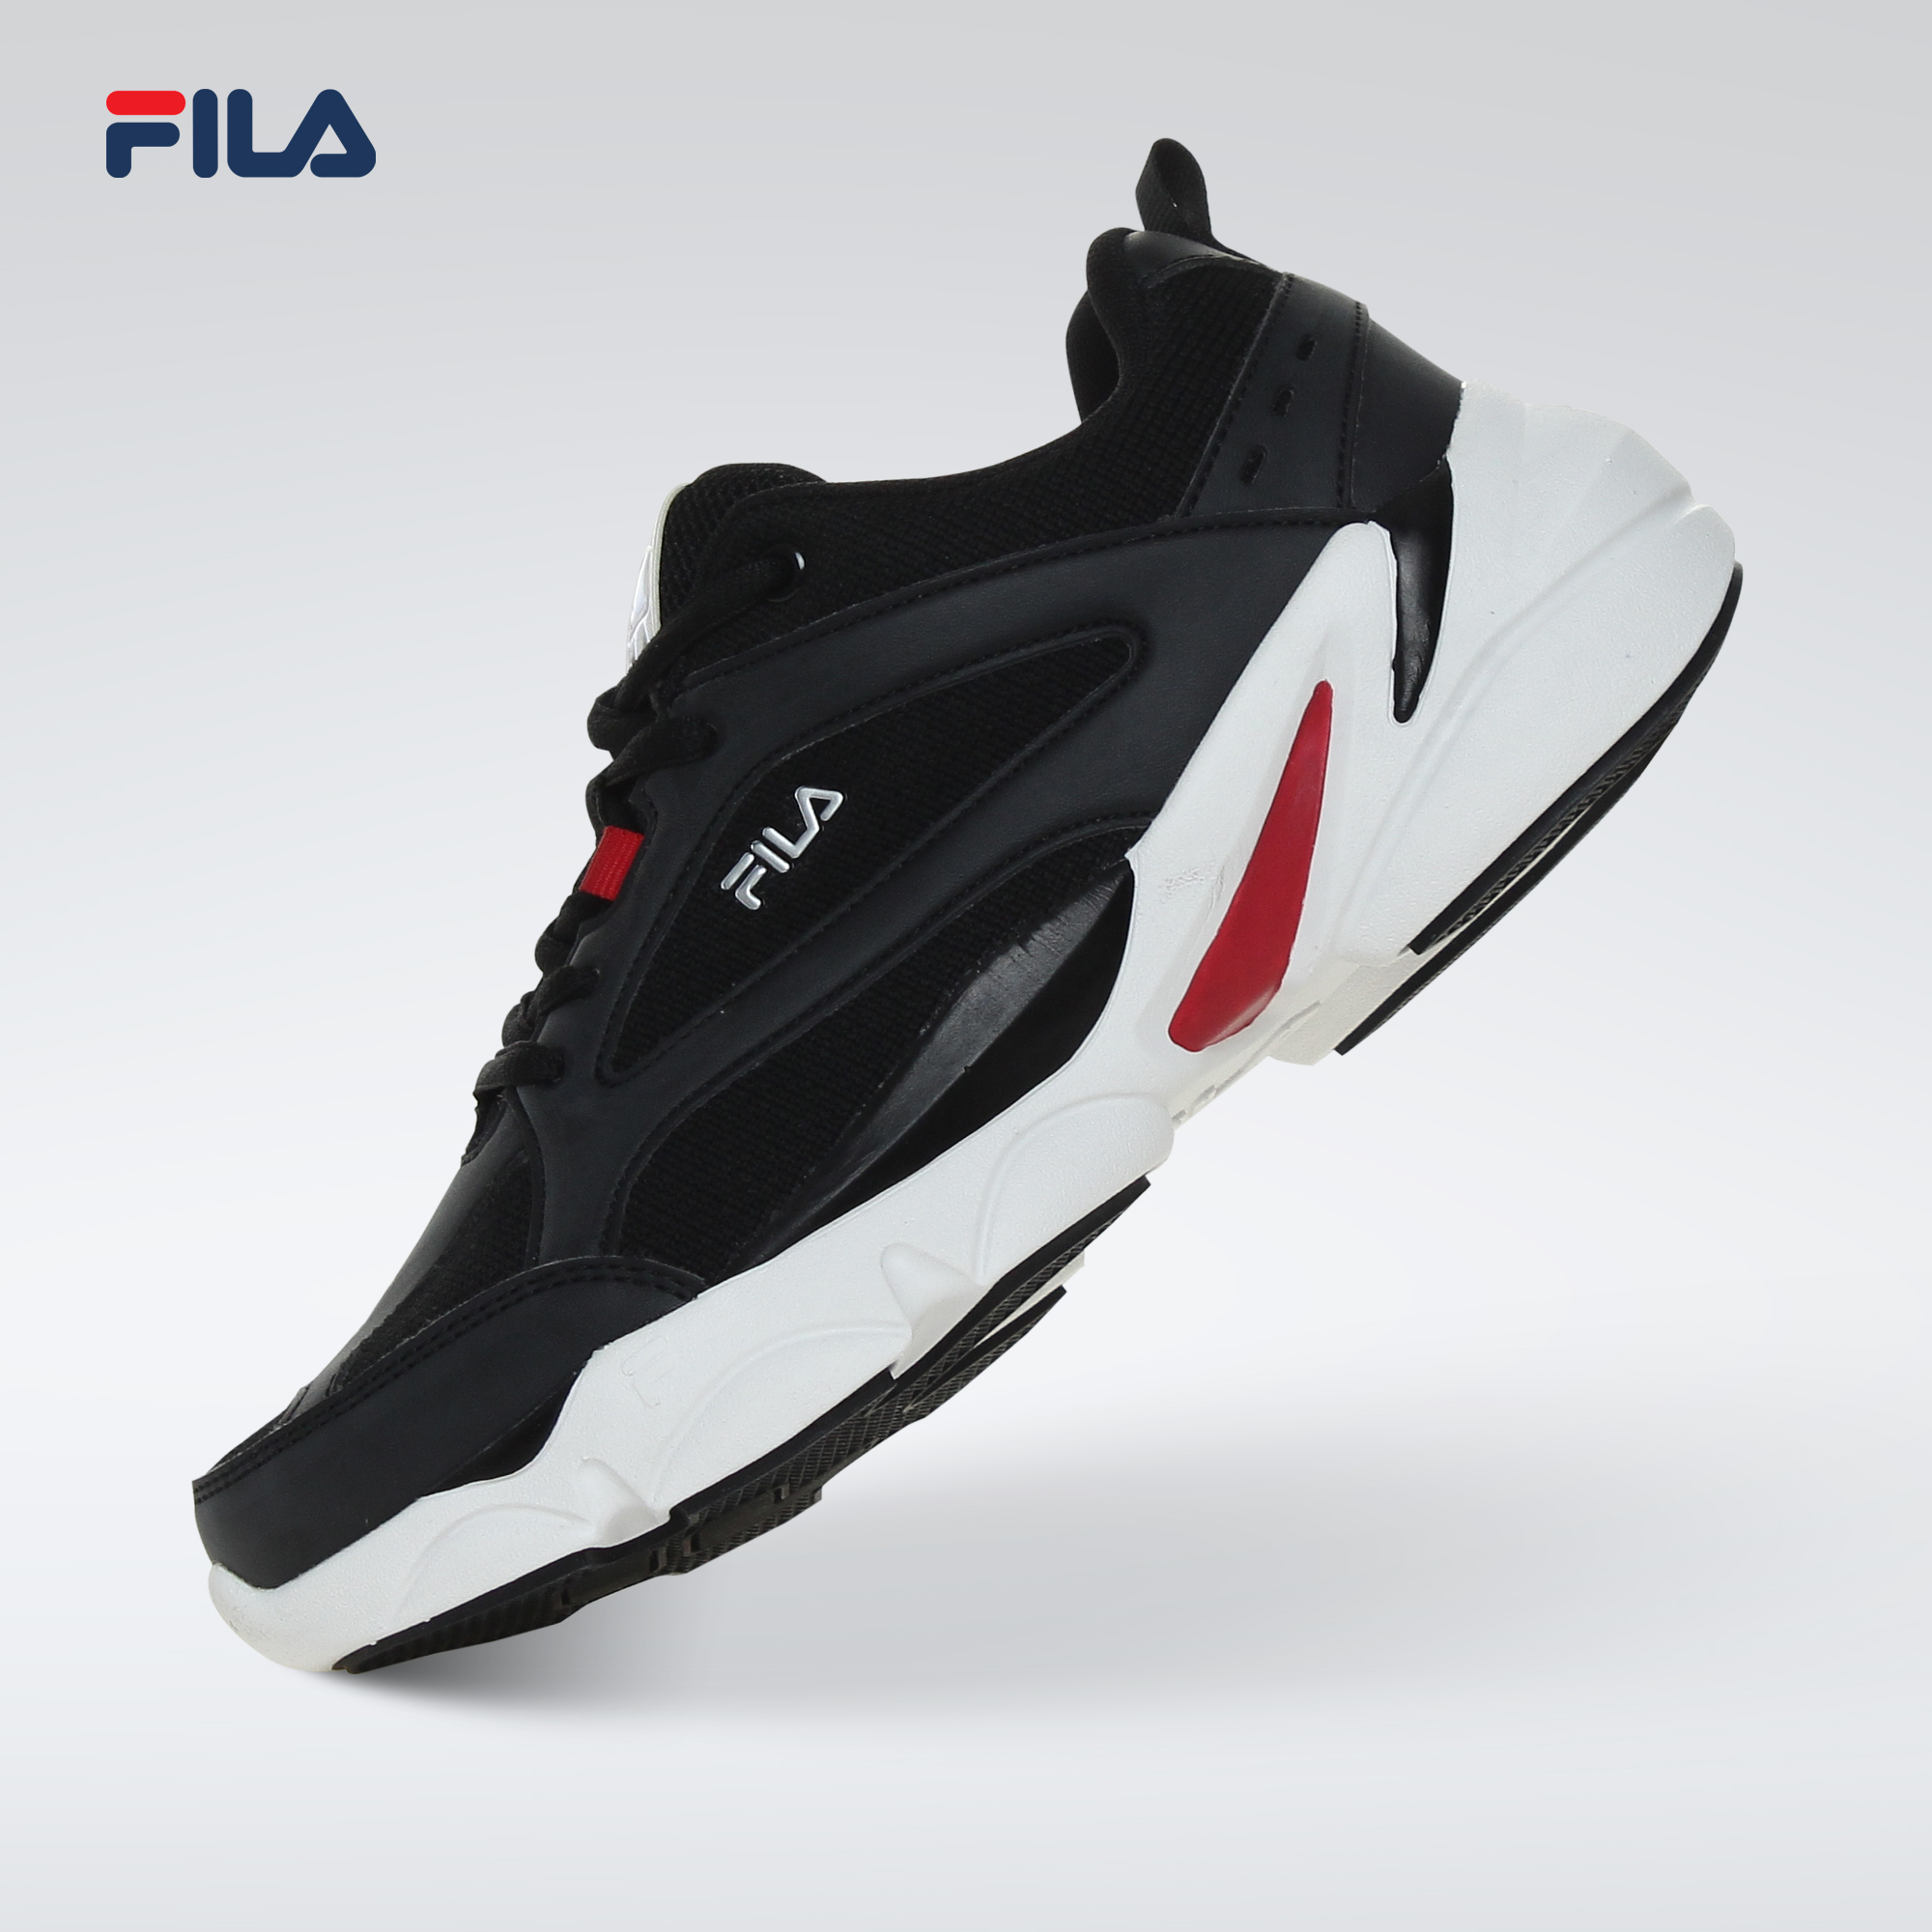 Fila Attractor Wave Flow Women's Running Shoes Black | Shopee Philippines